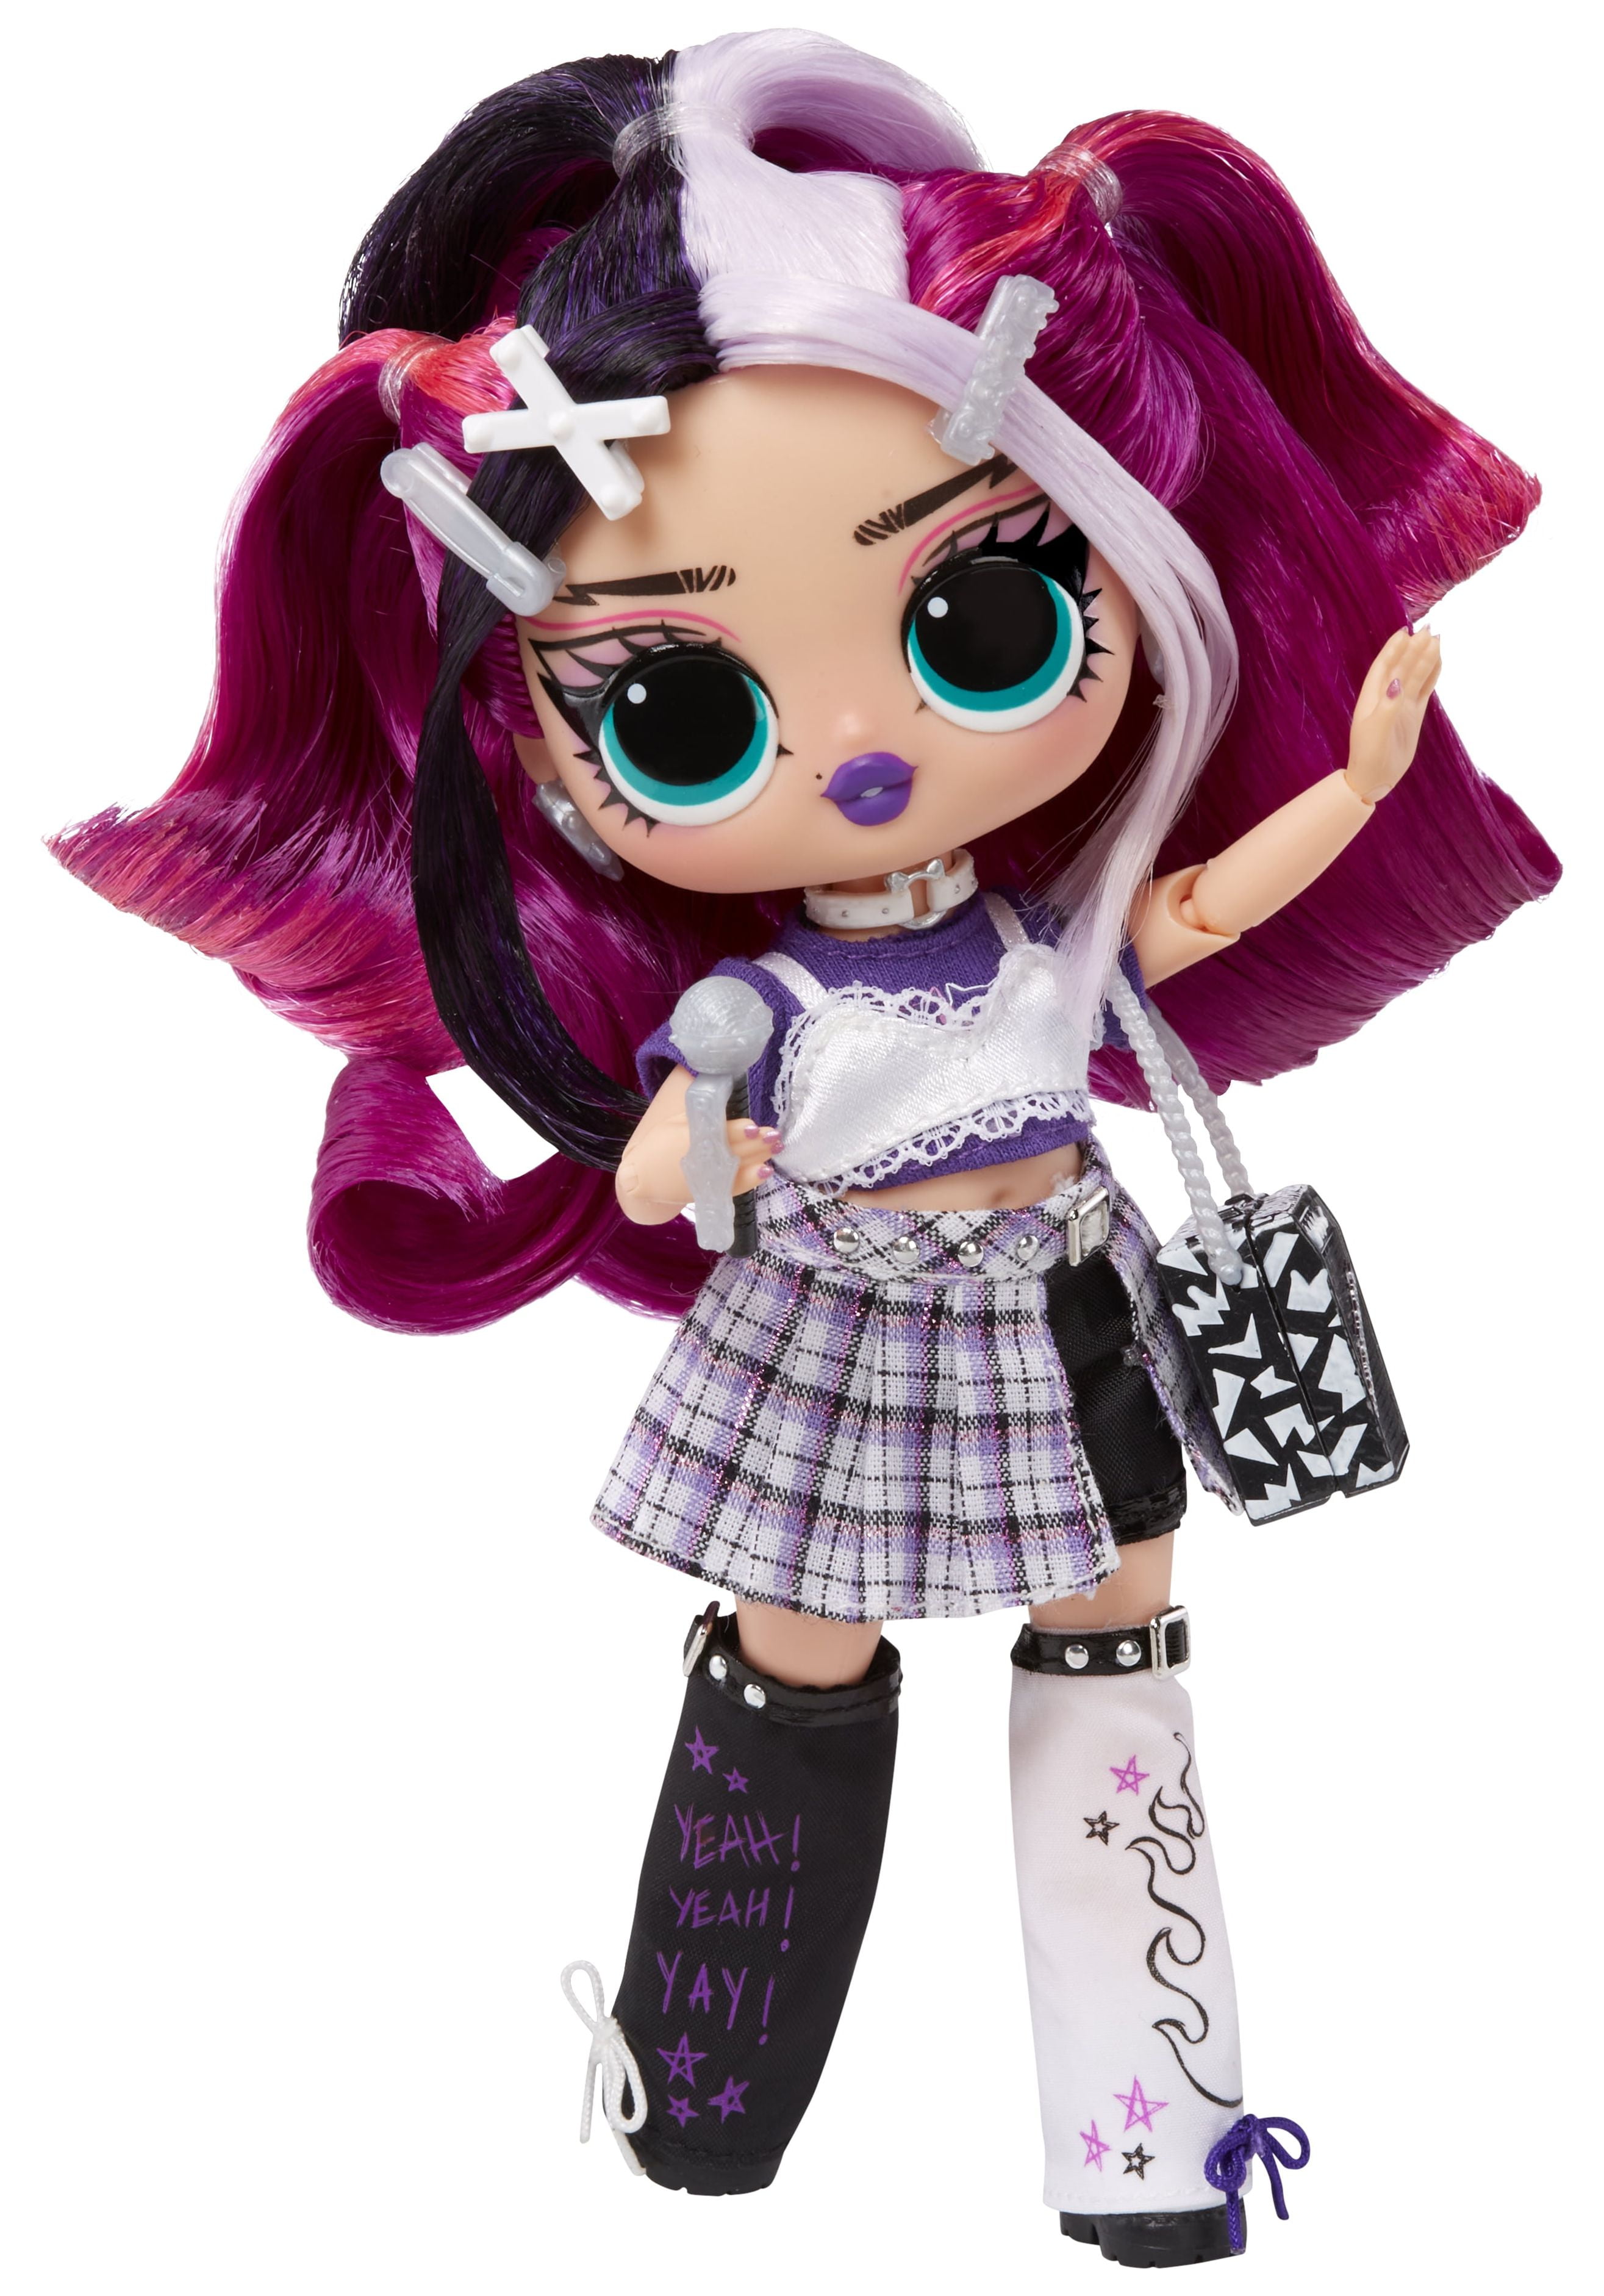 LOL Surprise Tweens Series 4 Fashion Doll Jenny Rox with 15 Surprises and  Fabulous Accessories – Great Gift for Kids Ages 4+